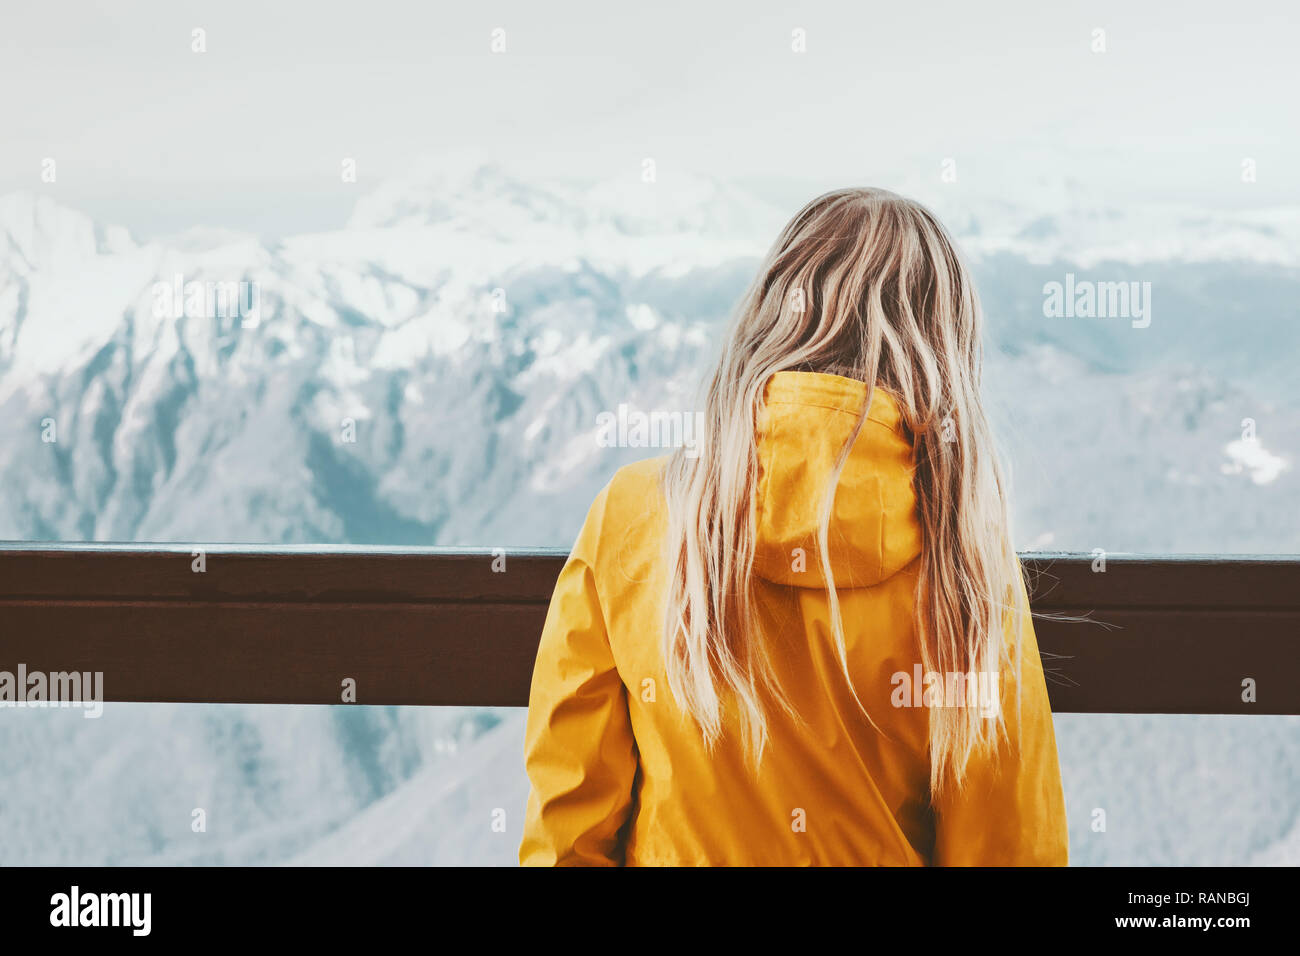 Woman traveler enjoying winter mountains landscape adventure travel lifestyle active vacations outdoor alone Stock Photo